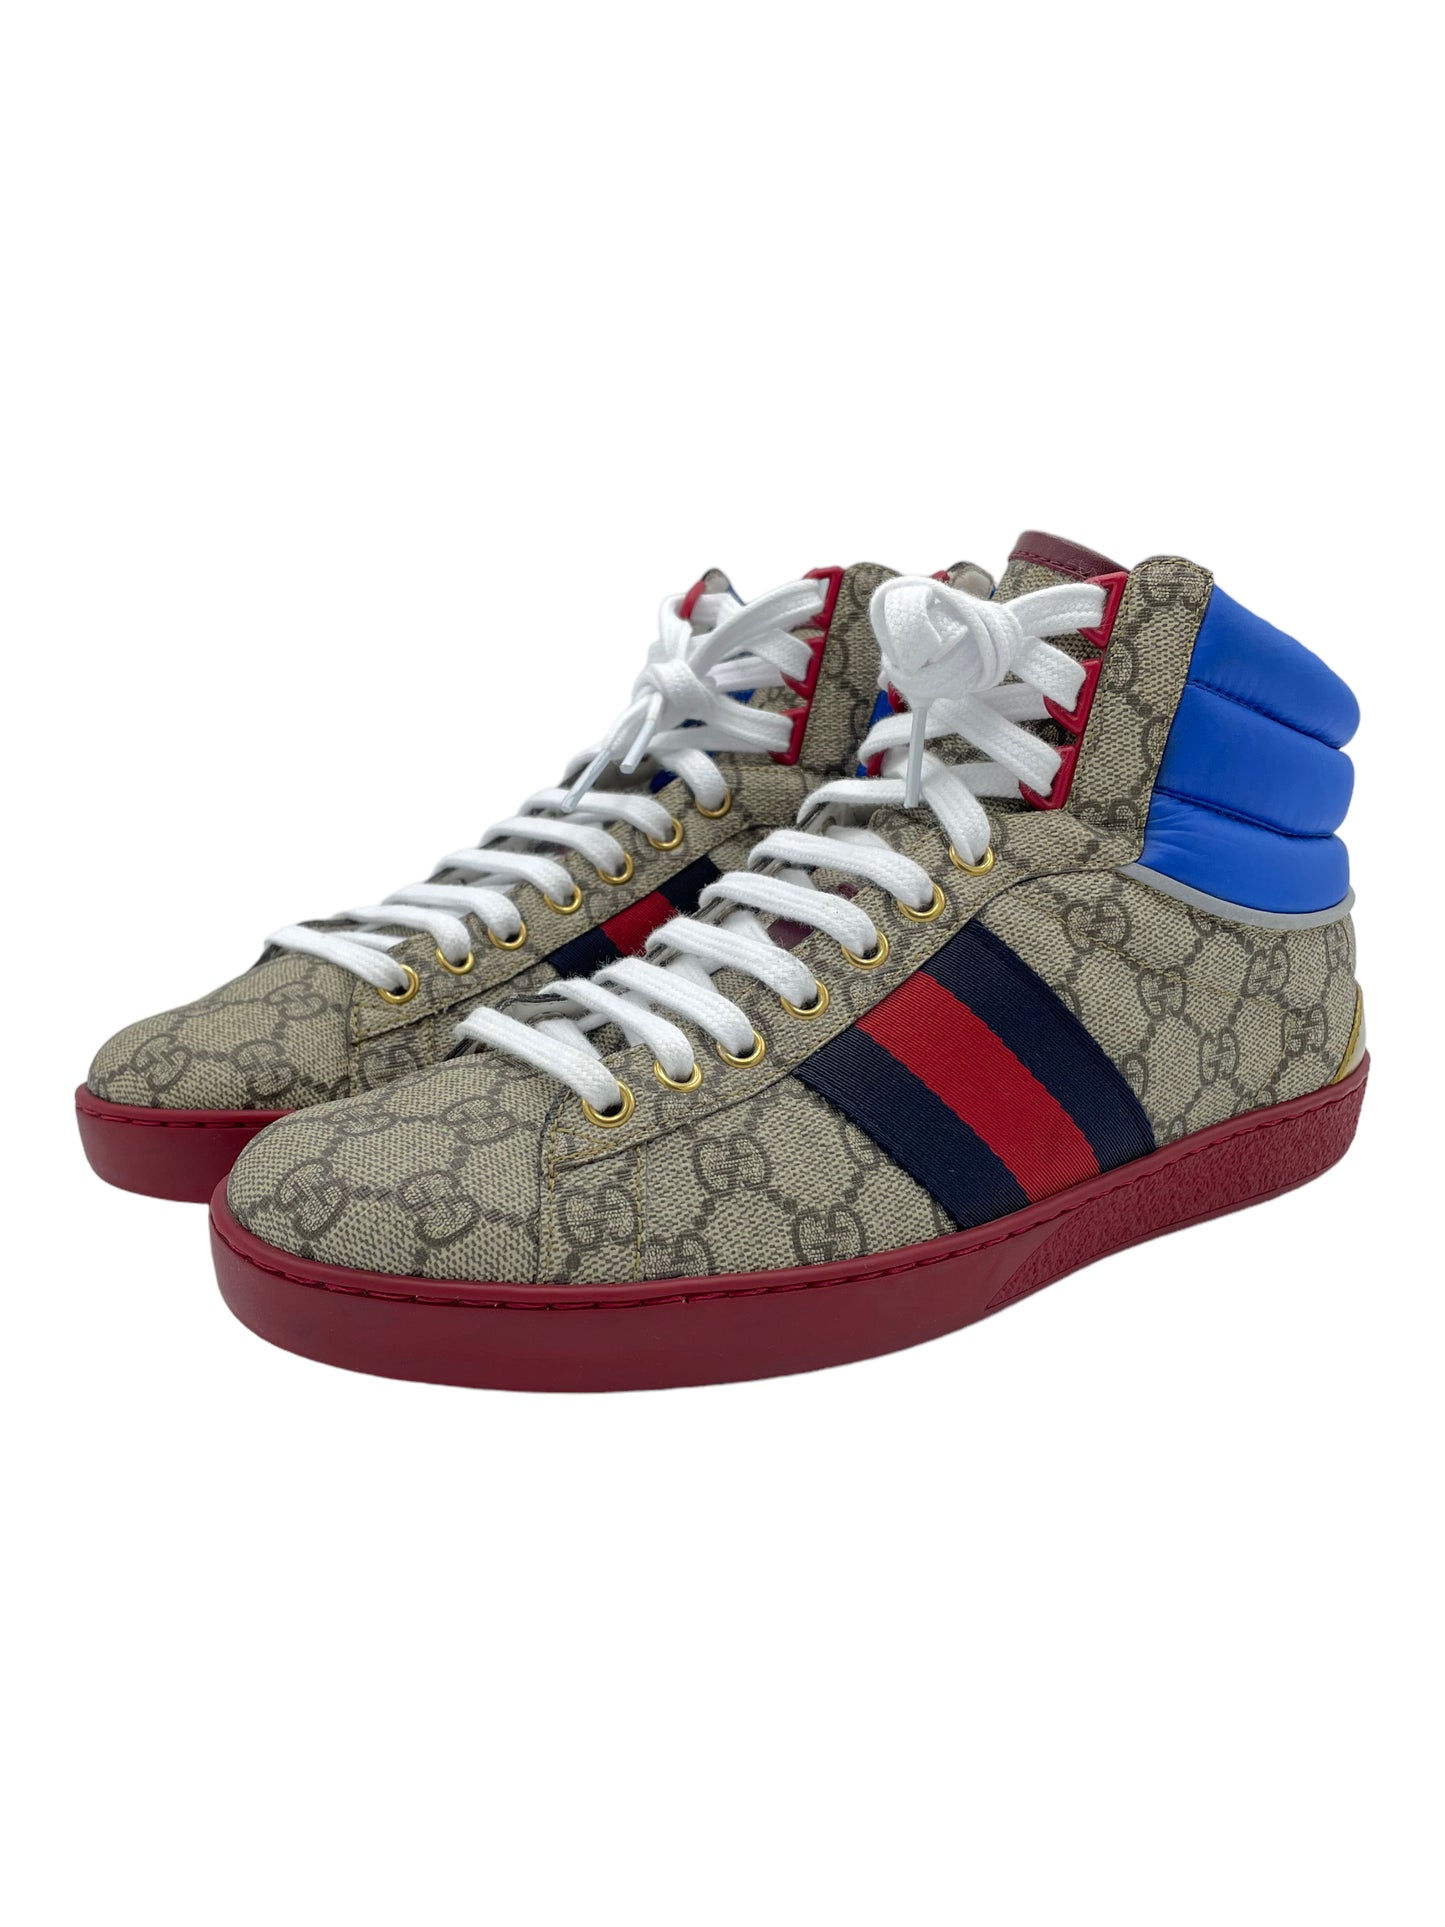 Gucci Tan High Top Sneakers - Genuine Design Luxury Consignment for Men. New & Pre-Owned Clothing, Shoes, & Accessories. Calgary, Canada